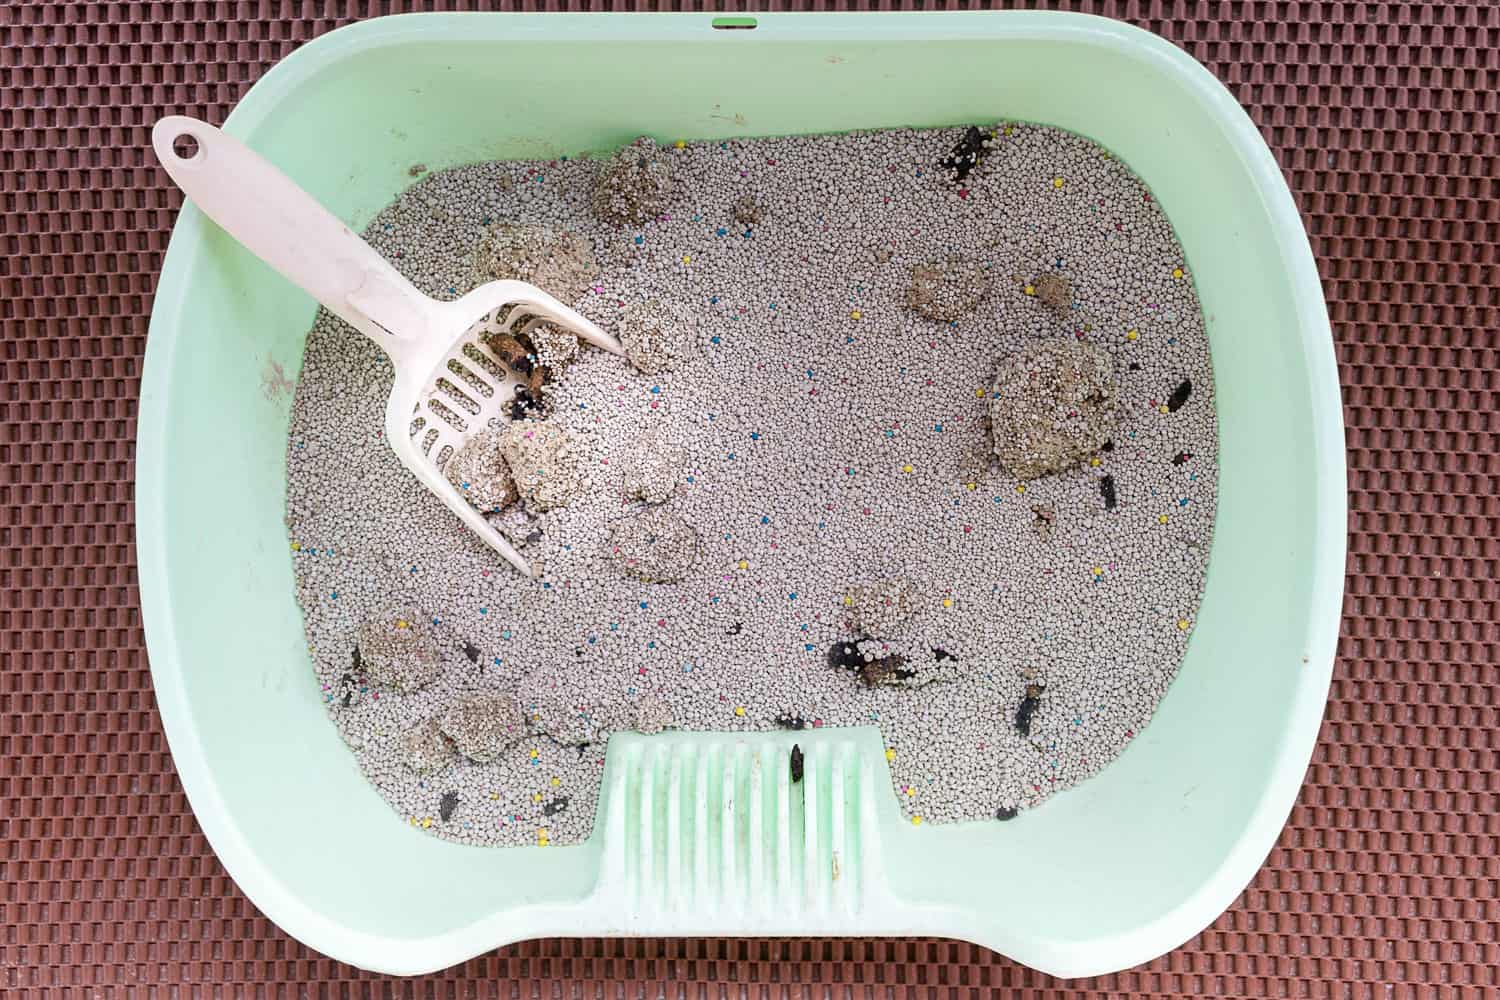 A cat's very messy litter box